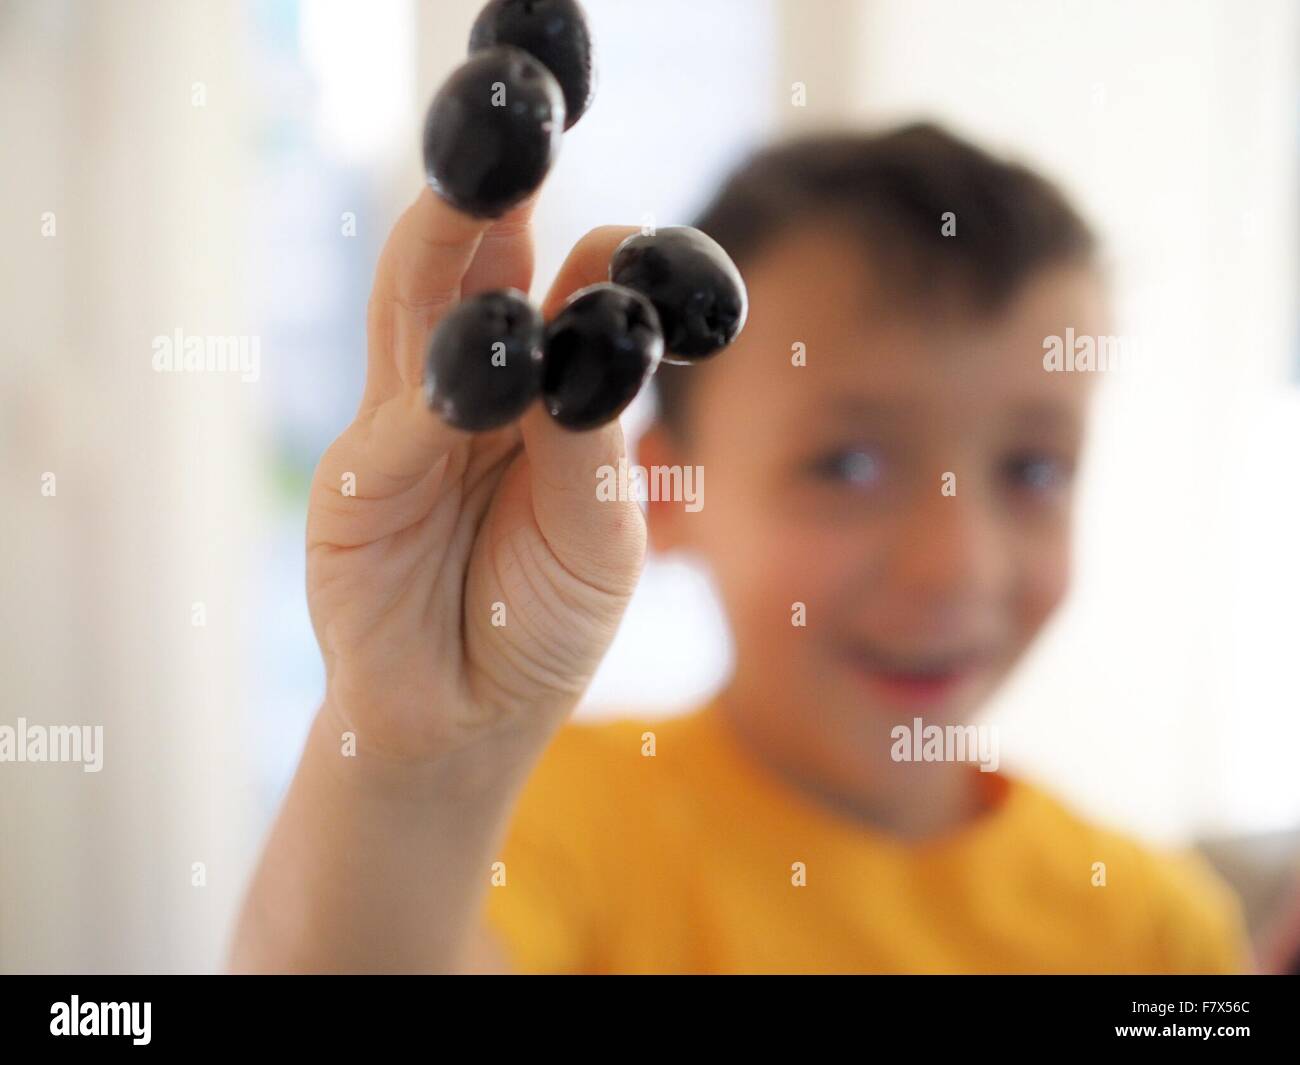 Boy with olives on his fingers Stock Photo